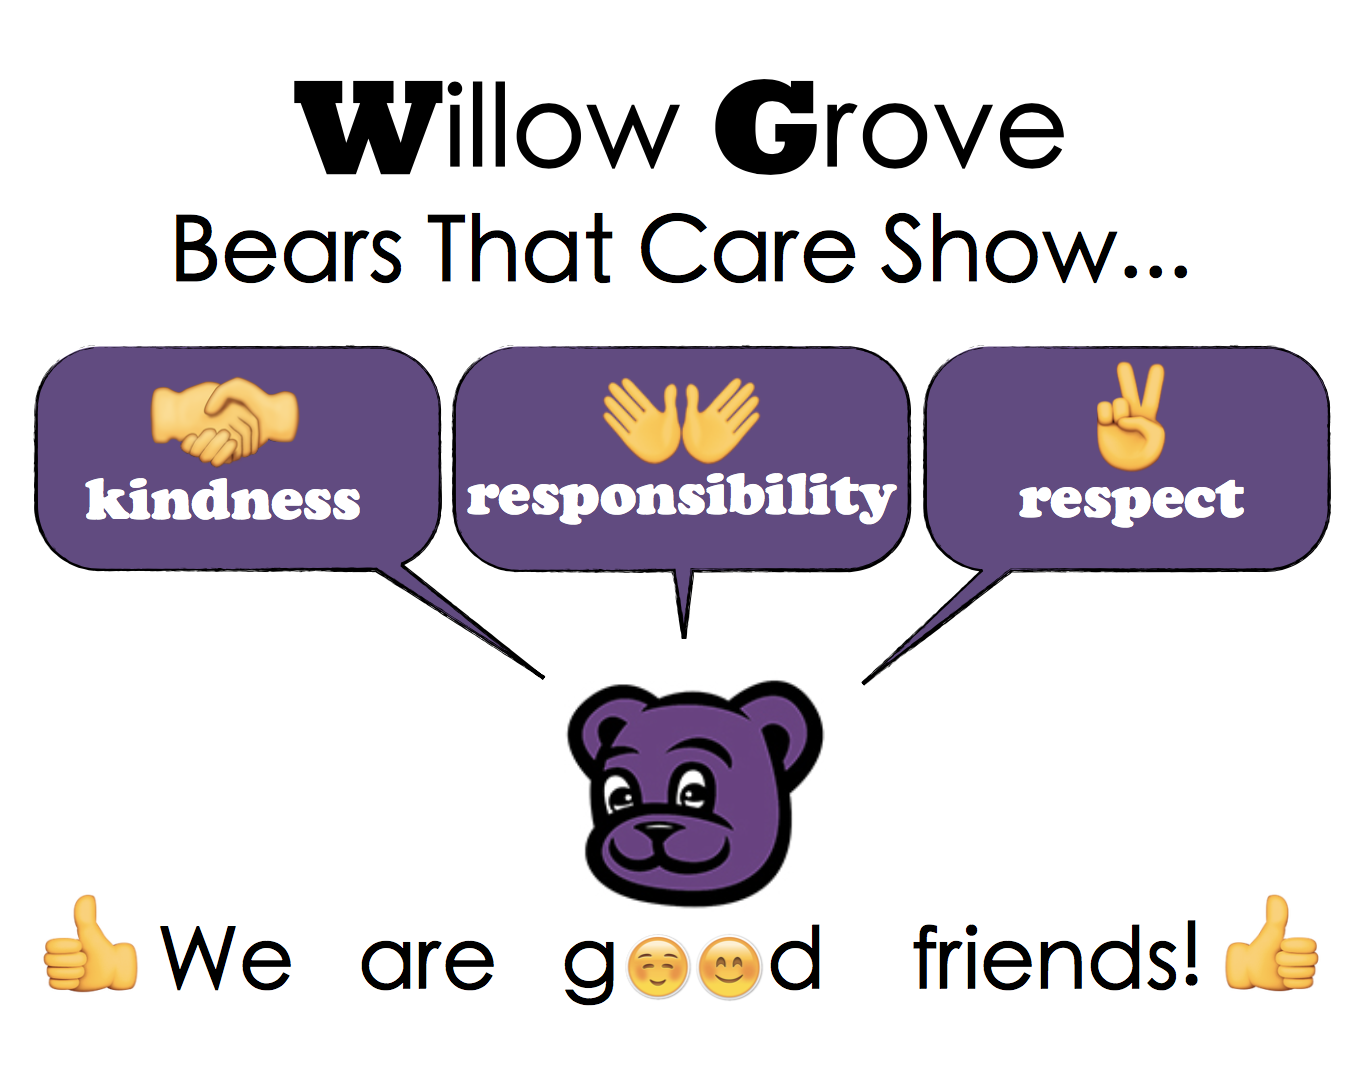 Willow Grove Bears that Care Show kindness, responsibility, and respect